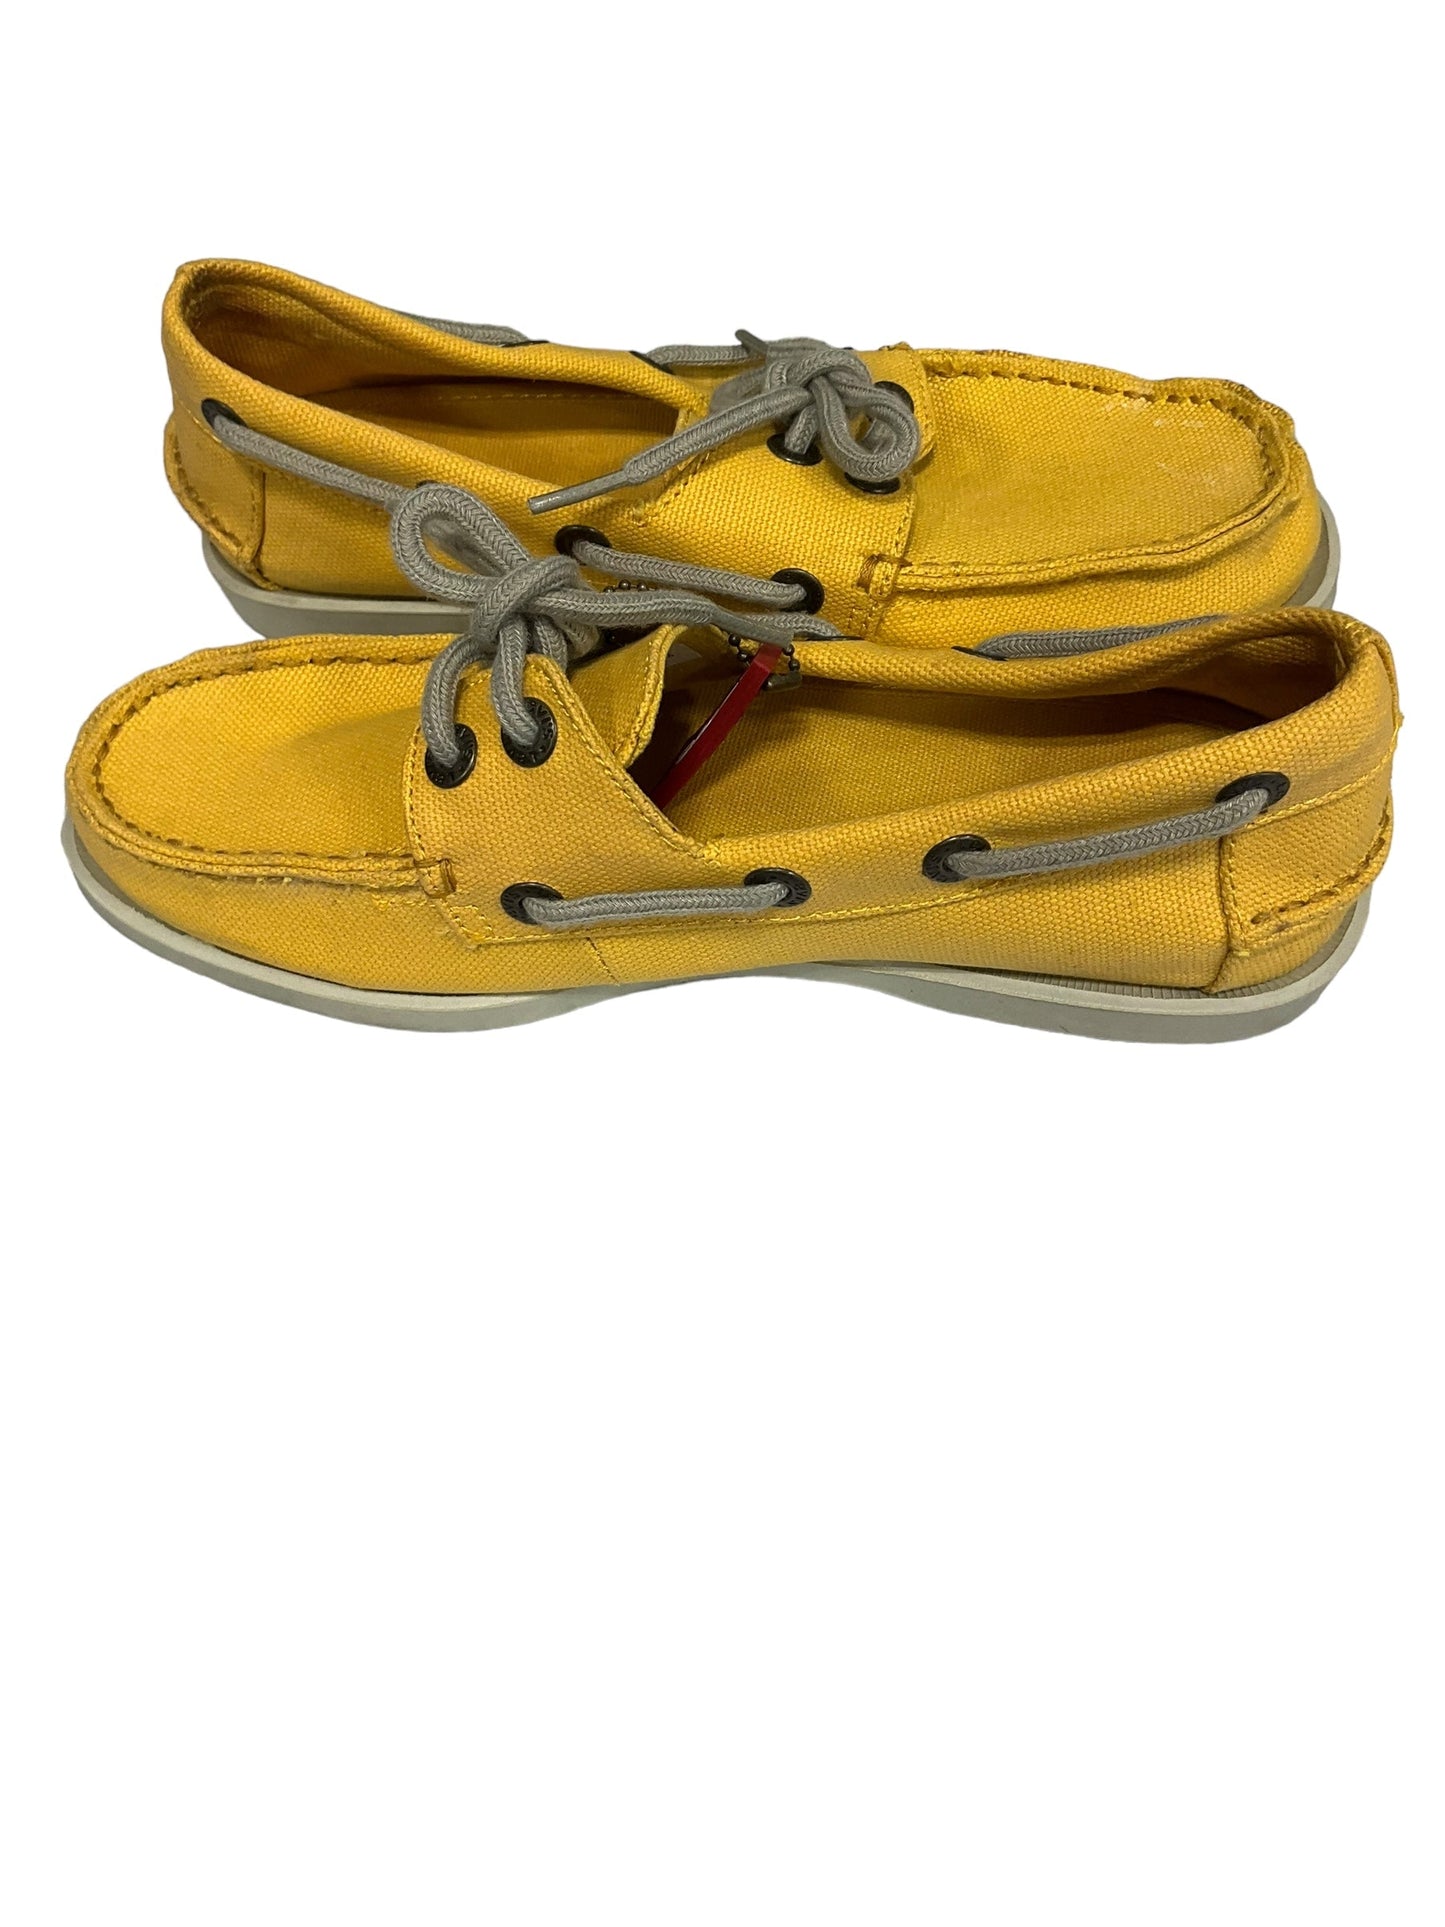 Yellow Shoes Flats Levis, Size 8